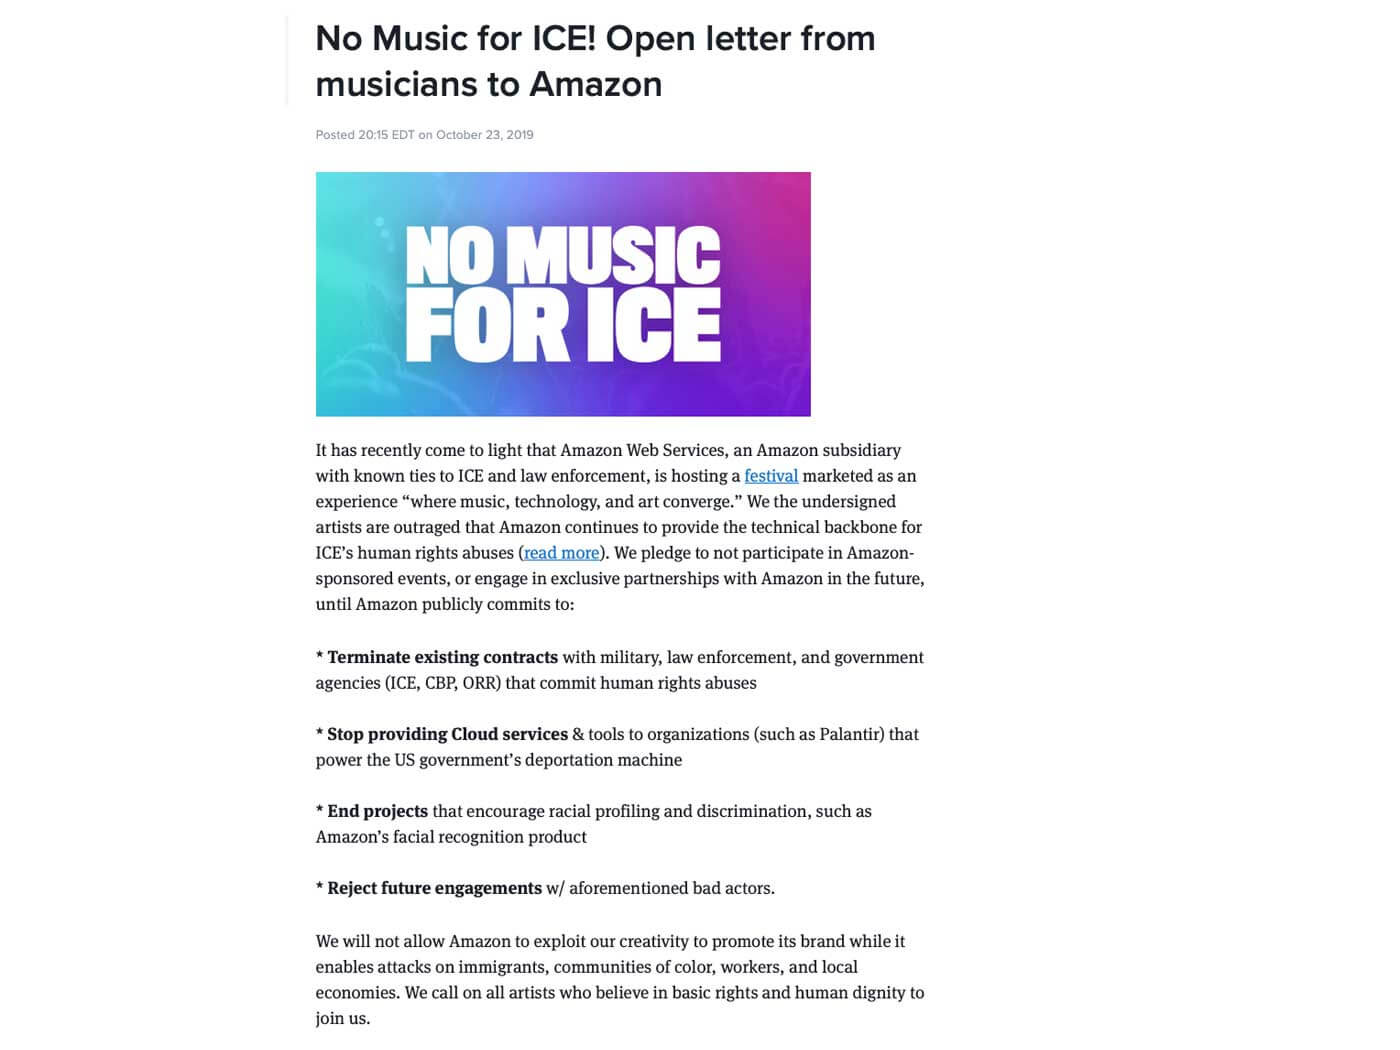 The No Music For ICE open letter